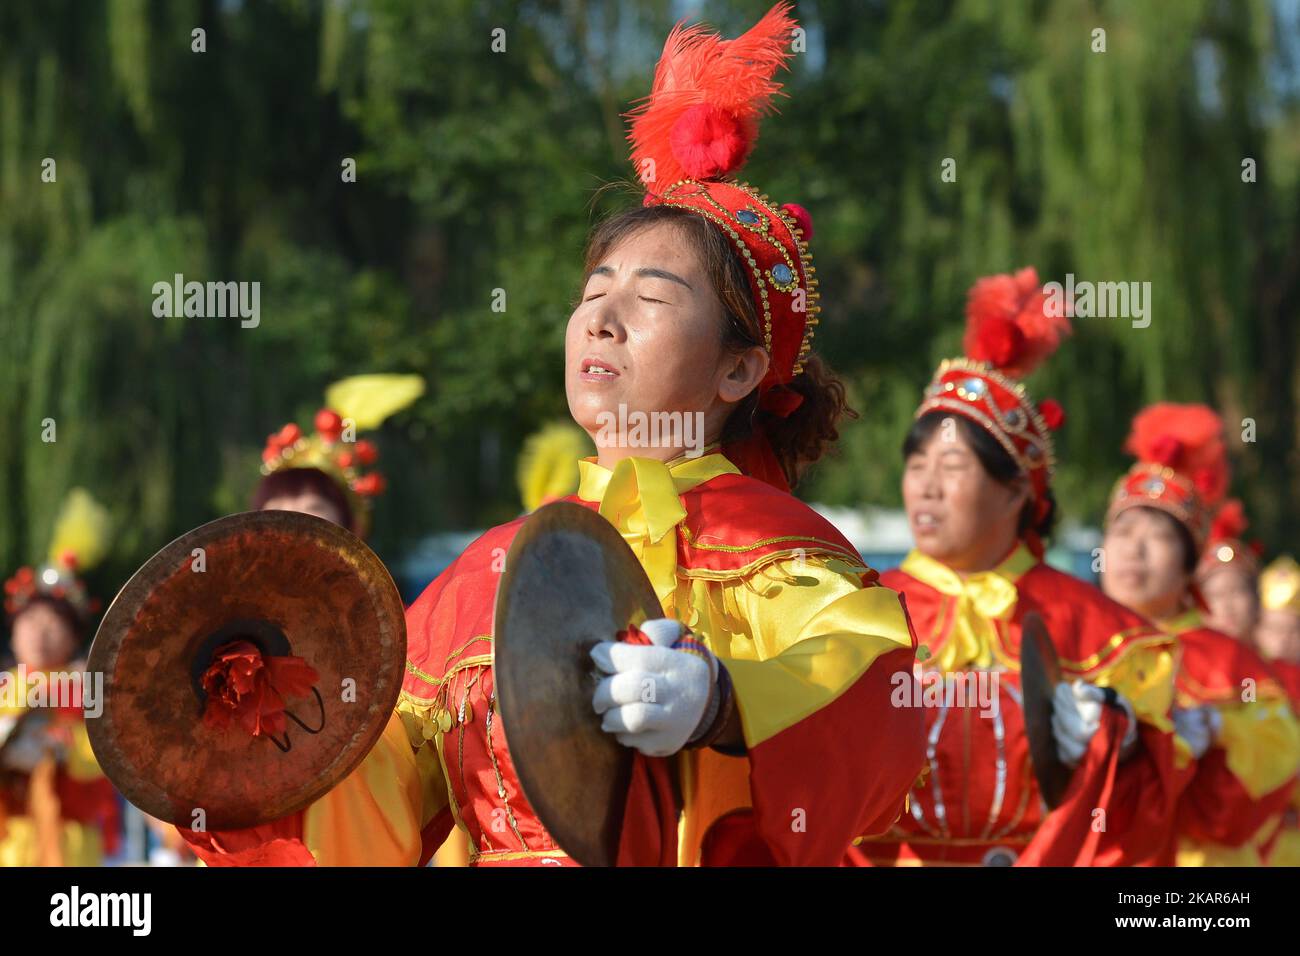 Demonstration of local dances from Jinzhong region ahead of the second stage Jinzhong A to B race of the 2017 Tour of China 1, the 197km from Dazhai to Yunzhu. On Tuesday, 12 September 2017, Dashai, Jinzhong, Shanxi Province, China. Photo by Artur Widak  Stock Photo